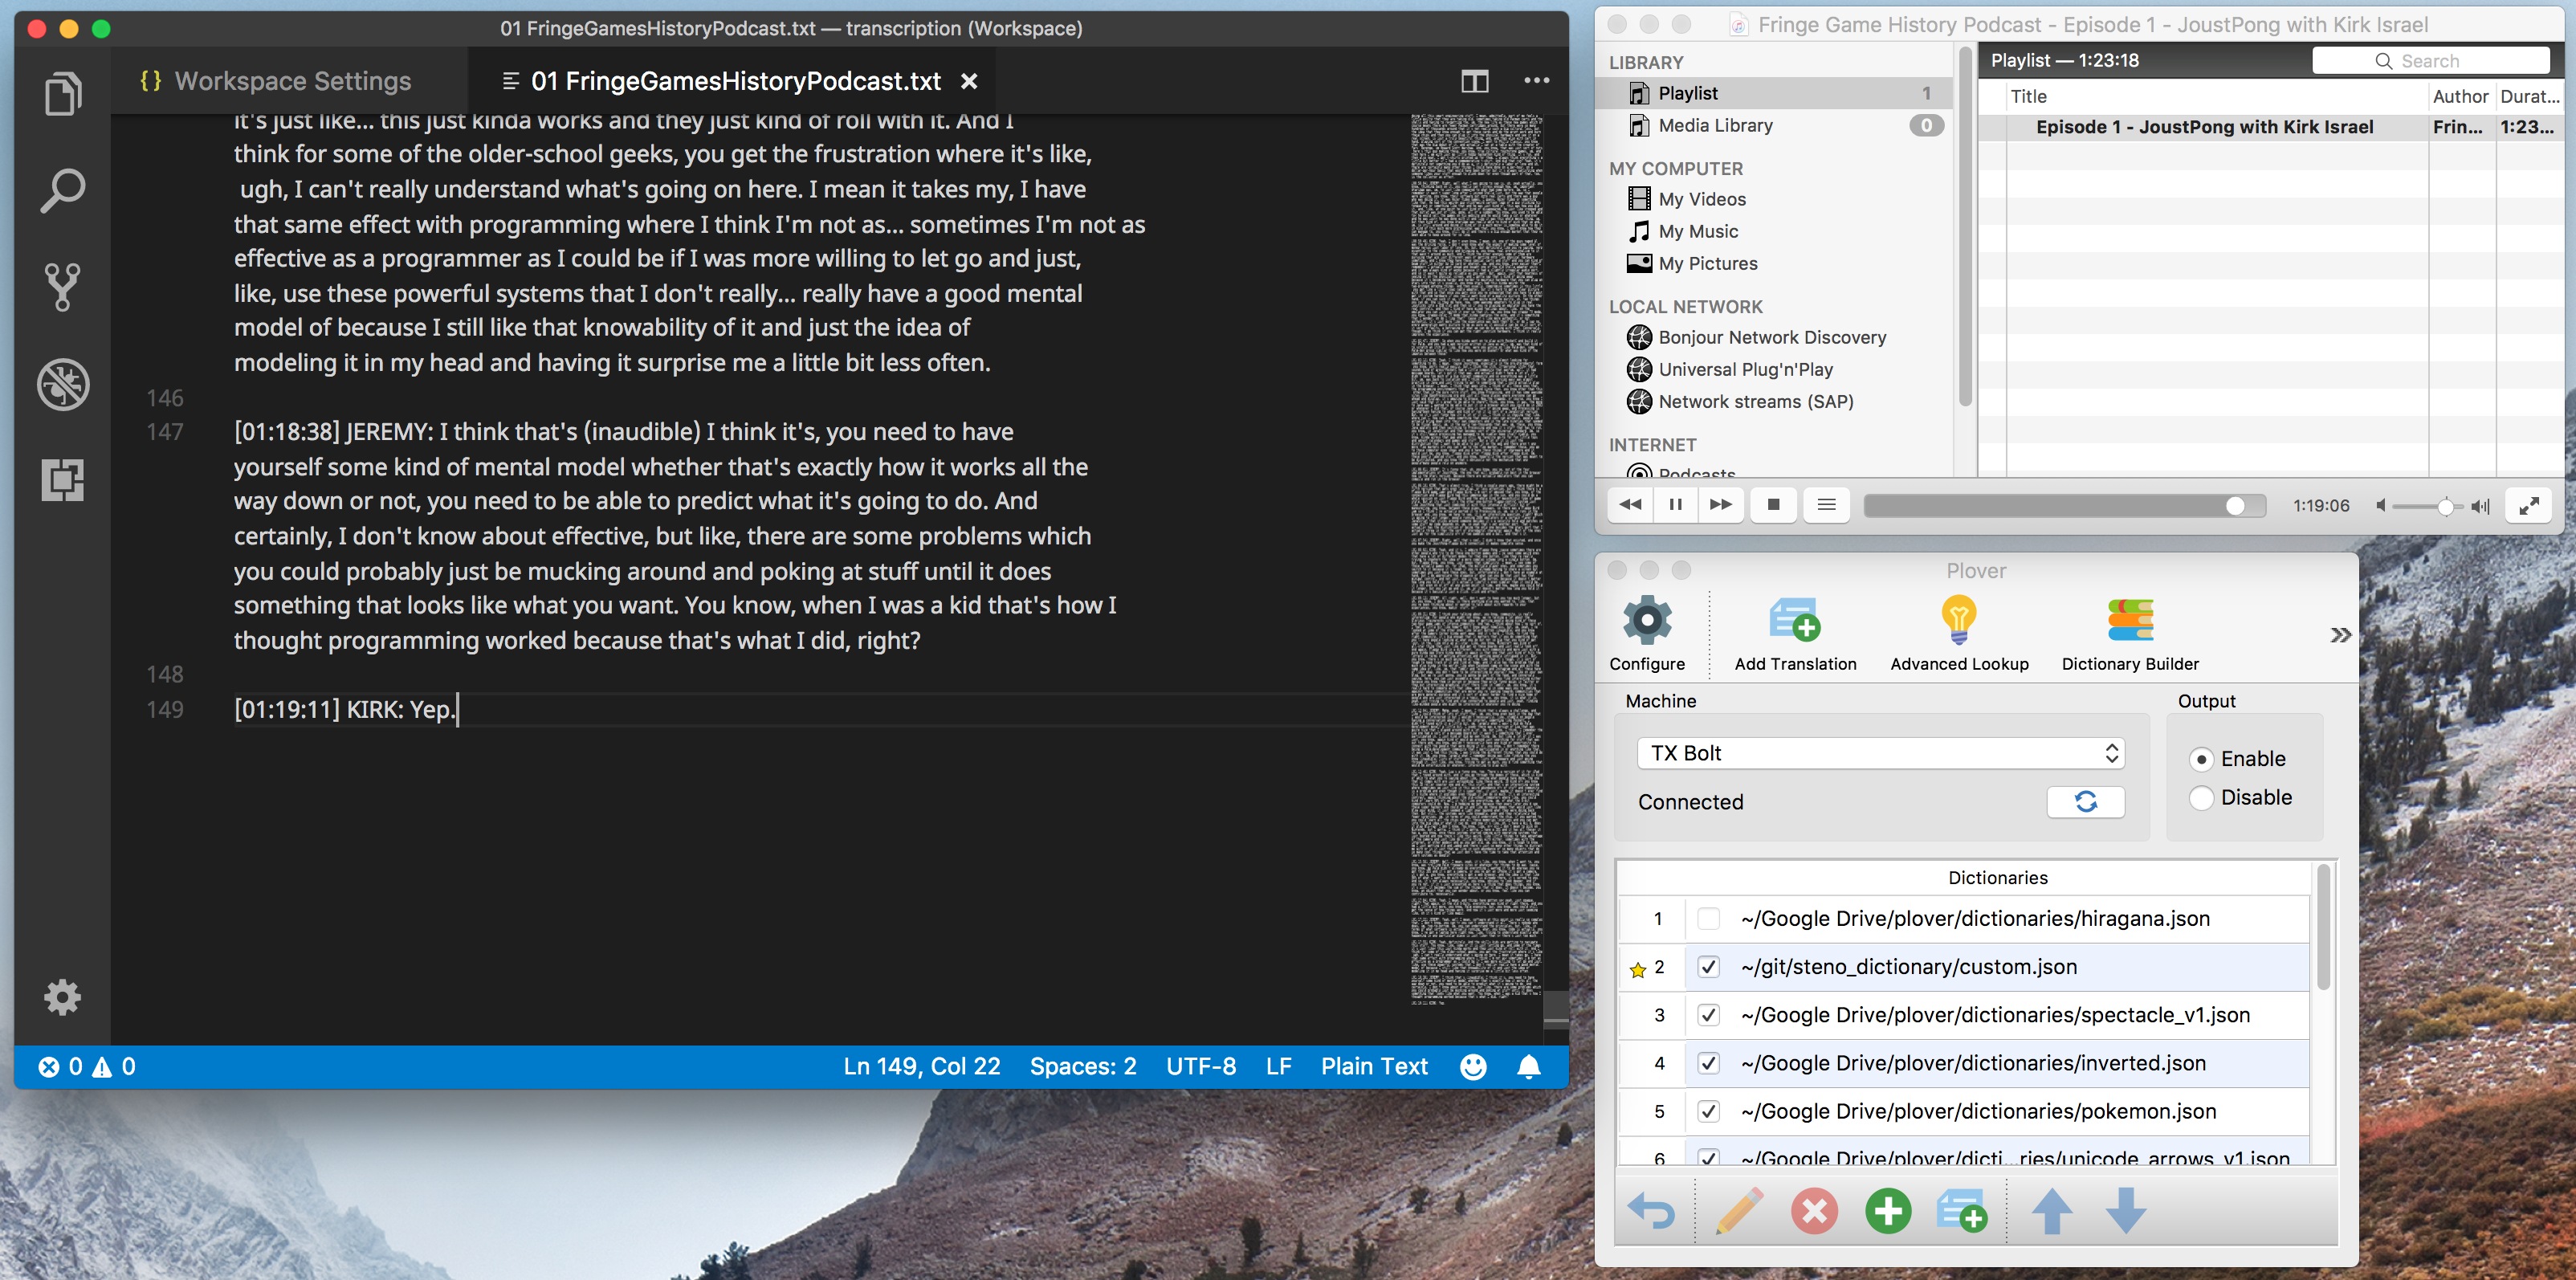 Screenshot of VSCode with an in-progress transcript, Plover in the enabled state, and VLC playing a podcast